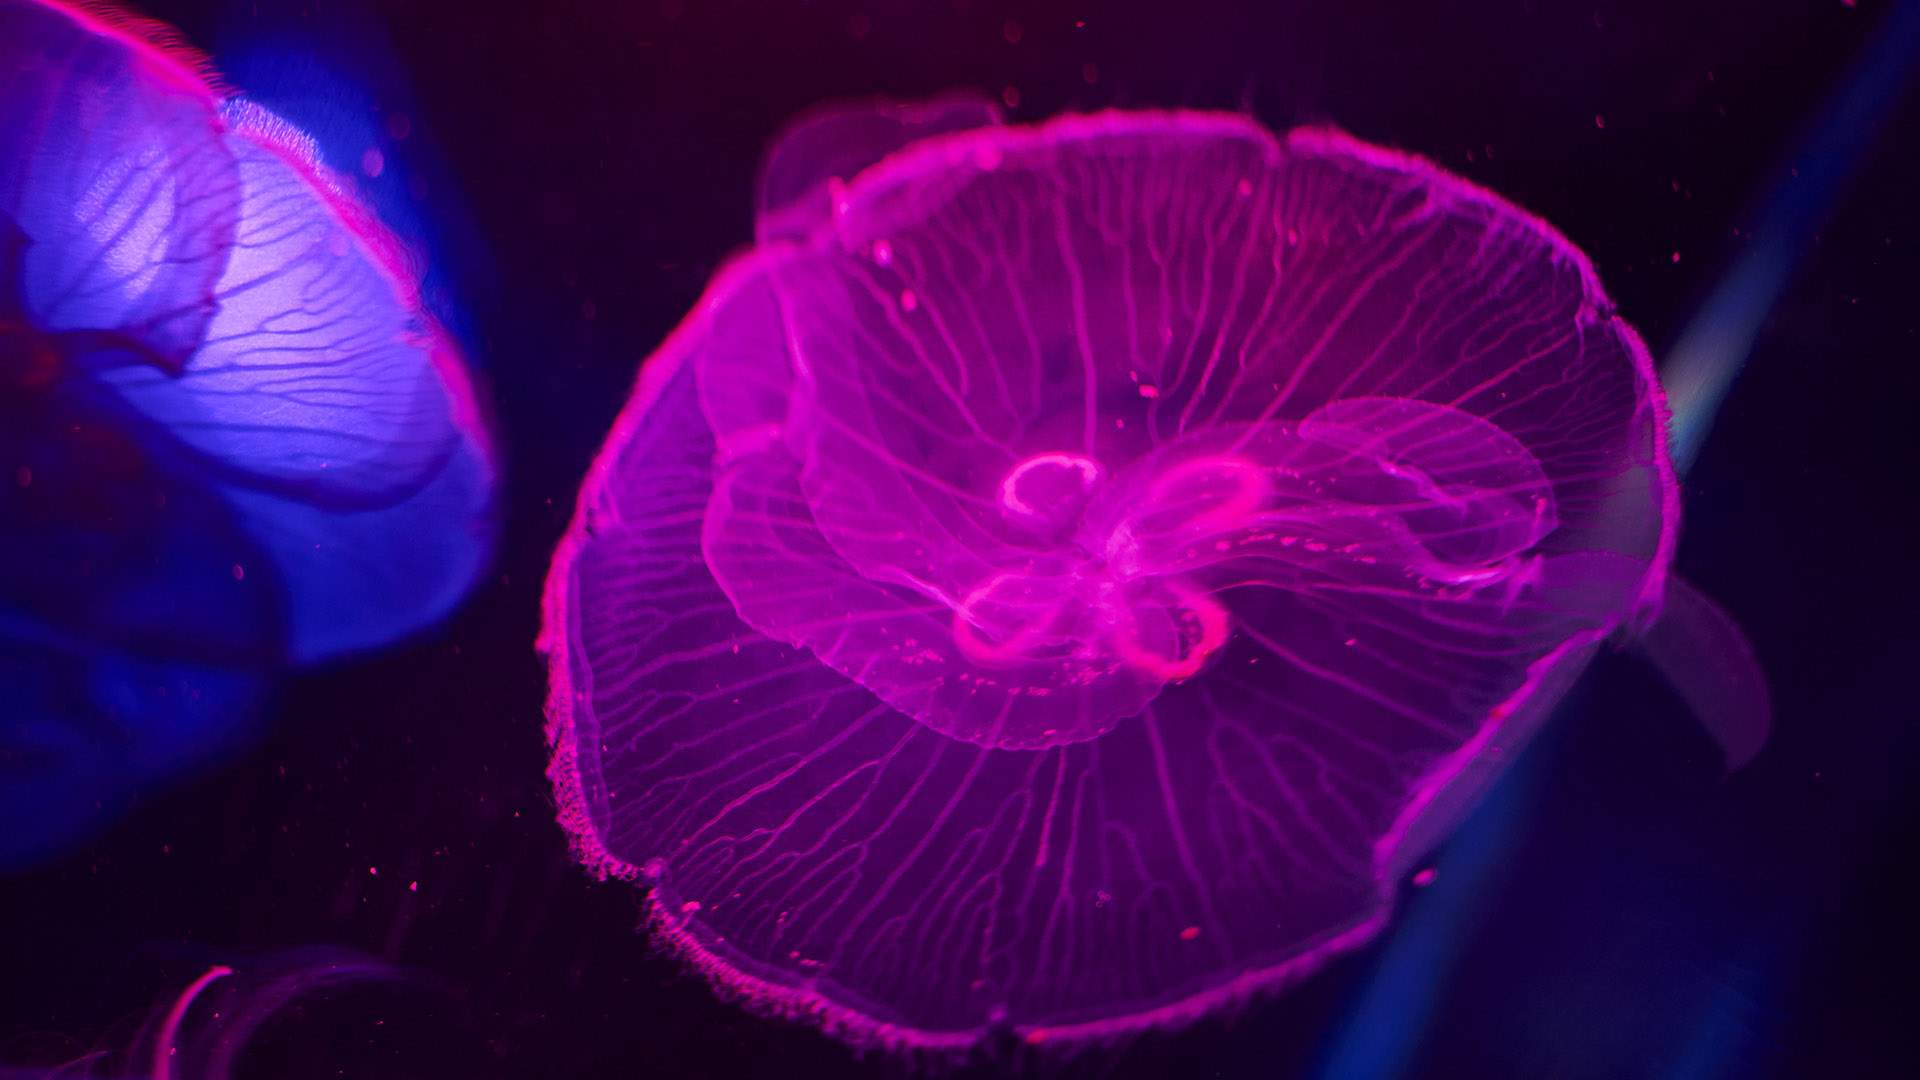 This Aquarium Has Released an Adorable and Soothing Series of Slow TV and Meditation Videos